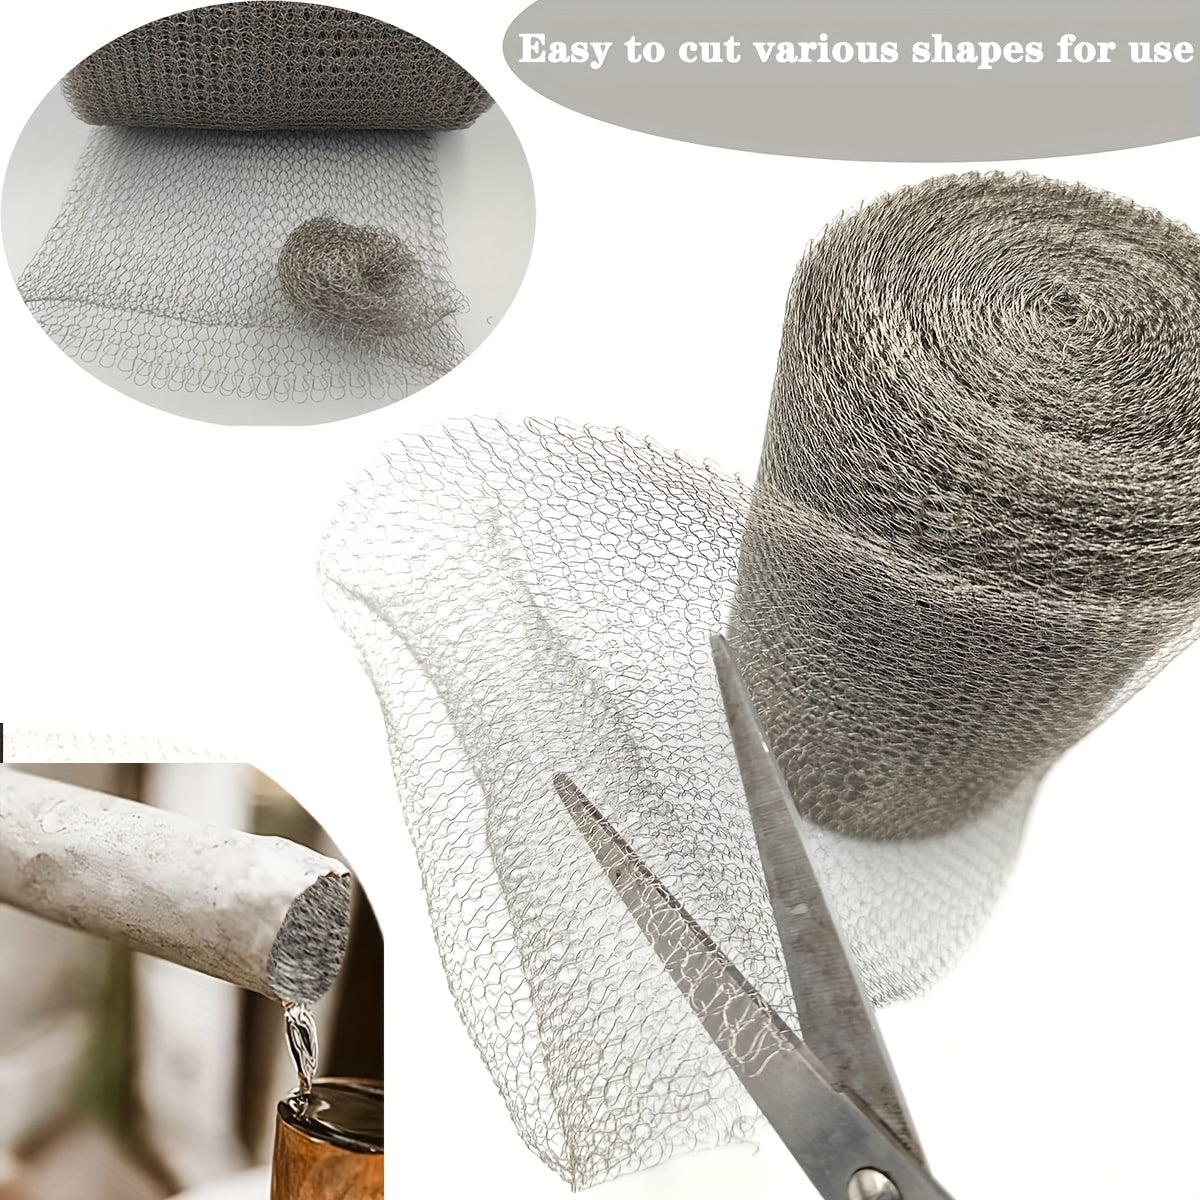 1 Set Stainless Steel Mesh Feet Blocker: DIY Hole Filler Kit for Flexible and Stretchy Hardware Cloth Fill Fabric - Perfect for DIY Projects!